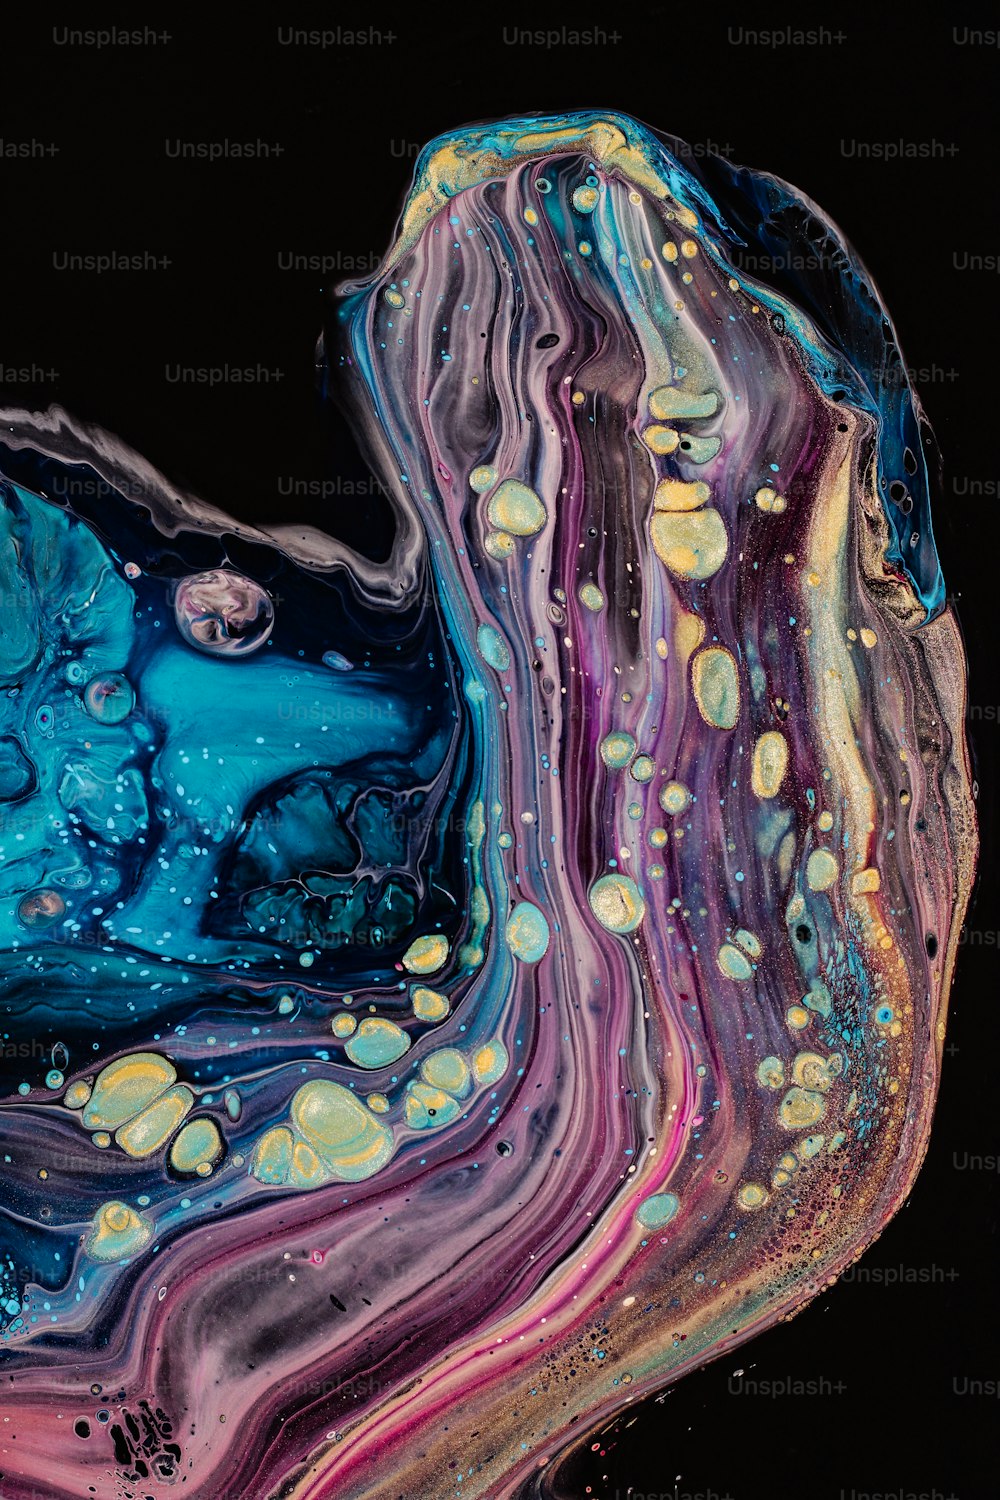 a close up of a liquid painting on a black background